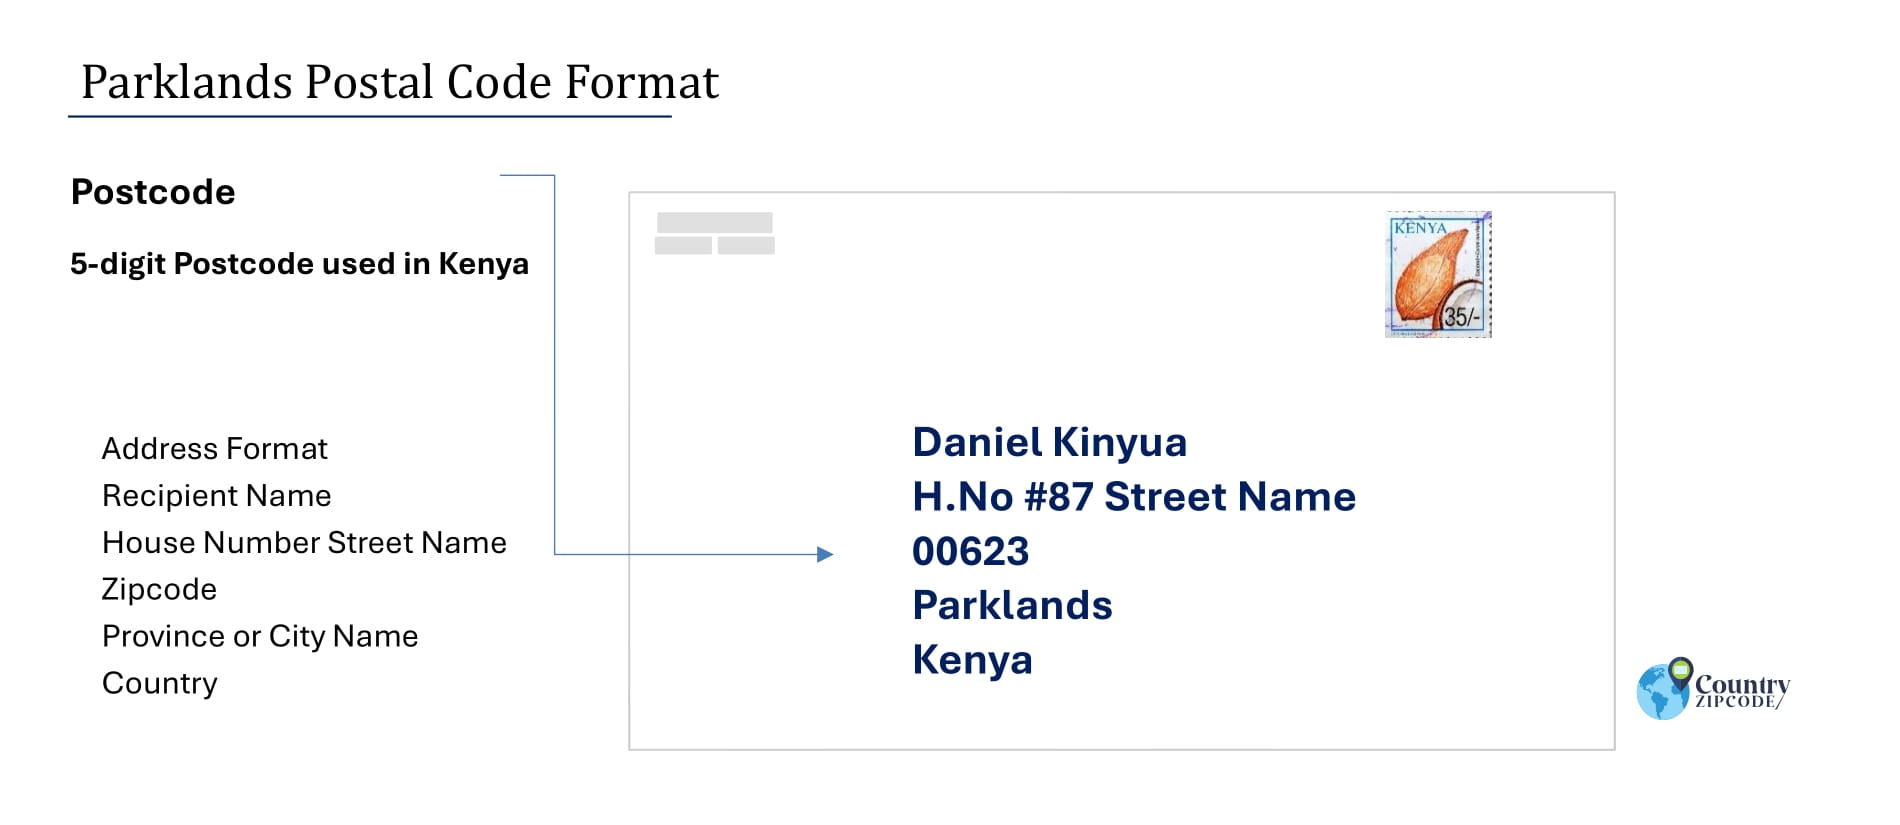 Example of Parklands Address and postal code format